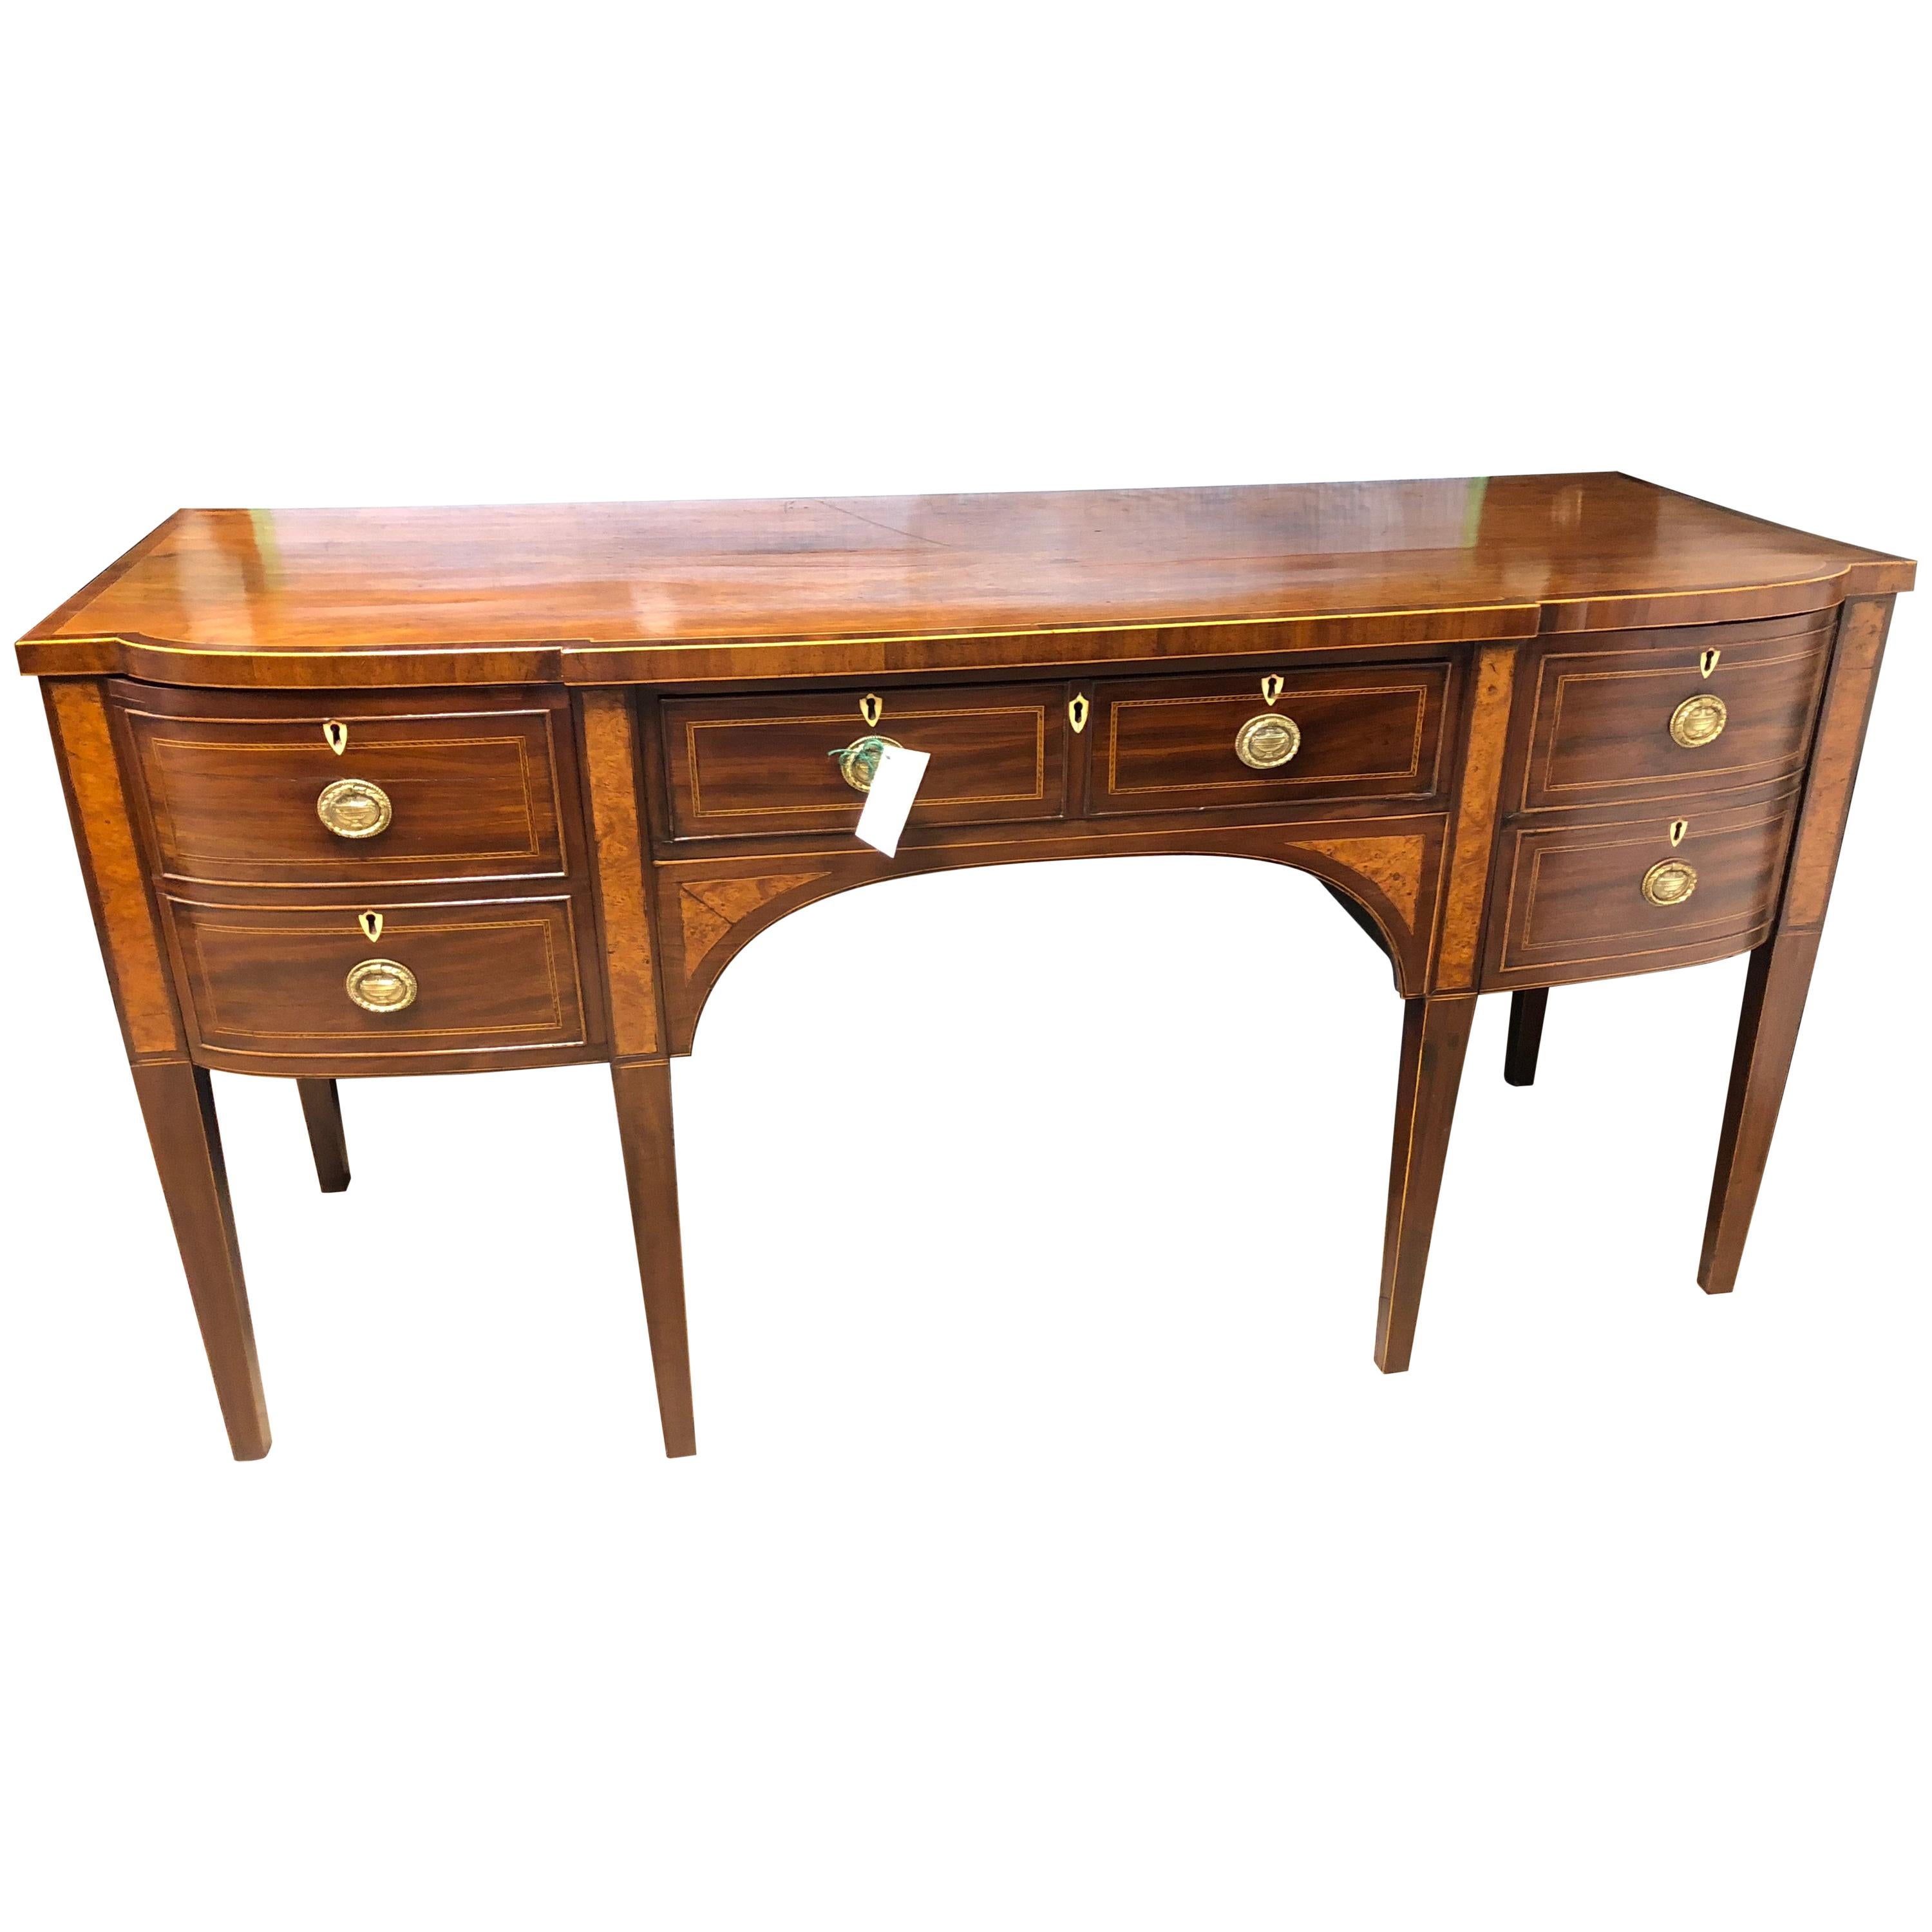 English Regency Sideboard with Fine Inlays, Escutechons, and Banded Top